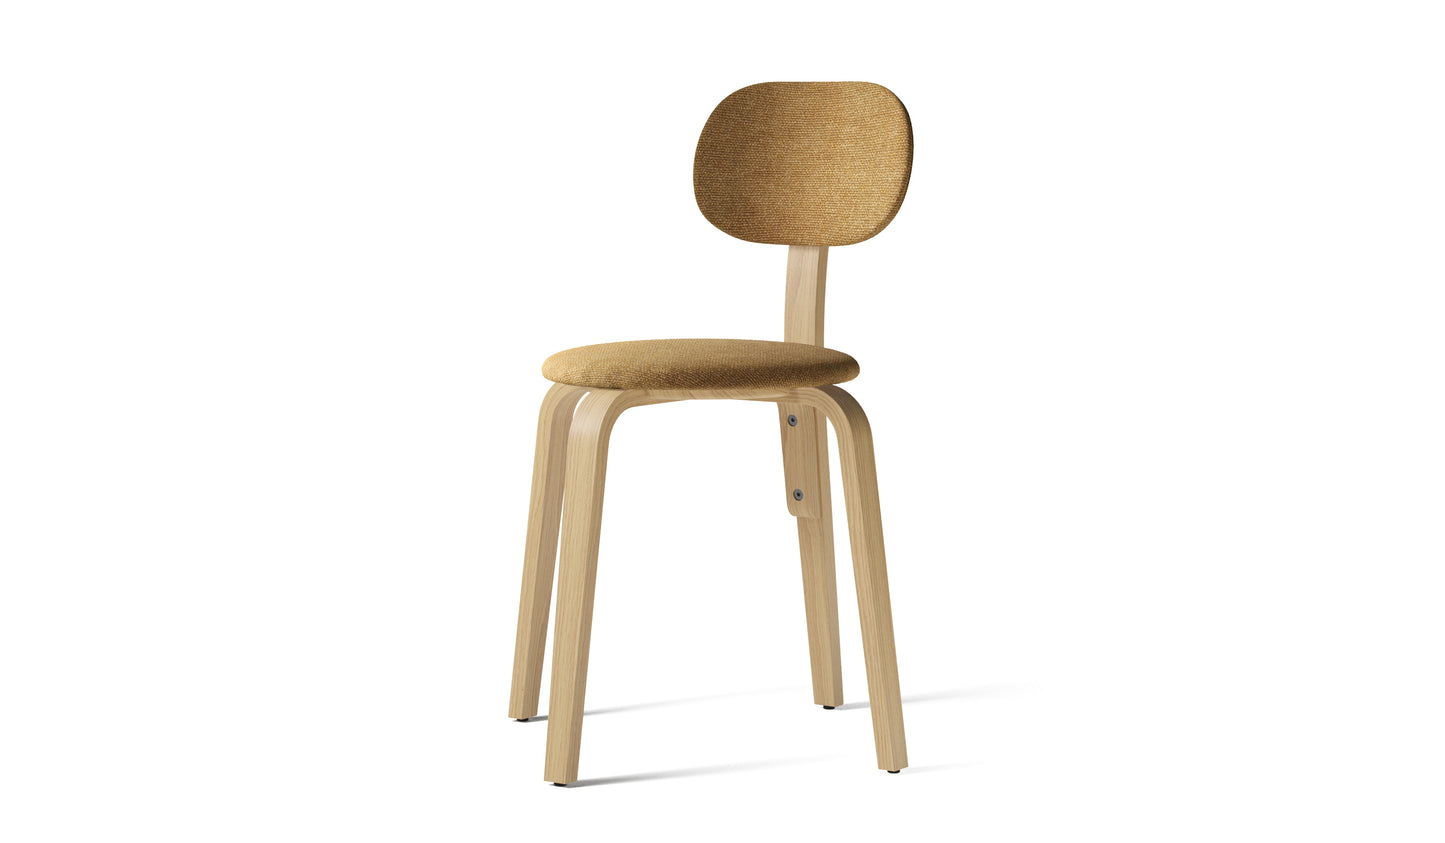 Afteroom Plywood, Dining Chair Upholstered Seat & Back by Menu / Audo Copenhagen